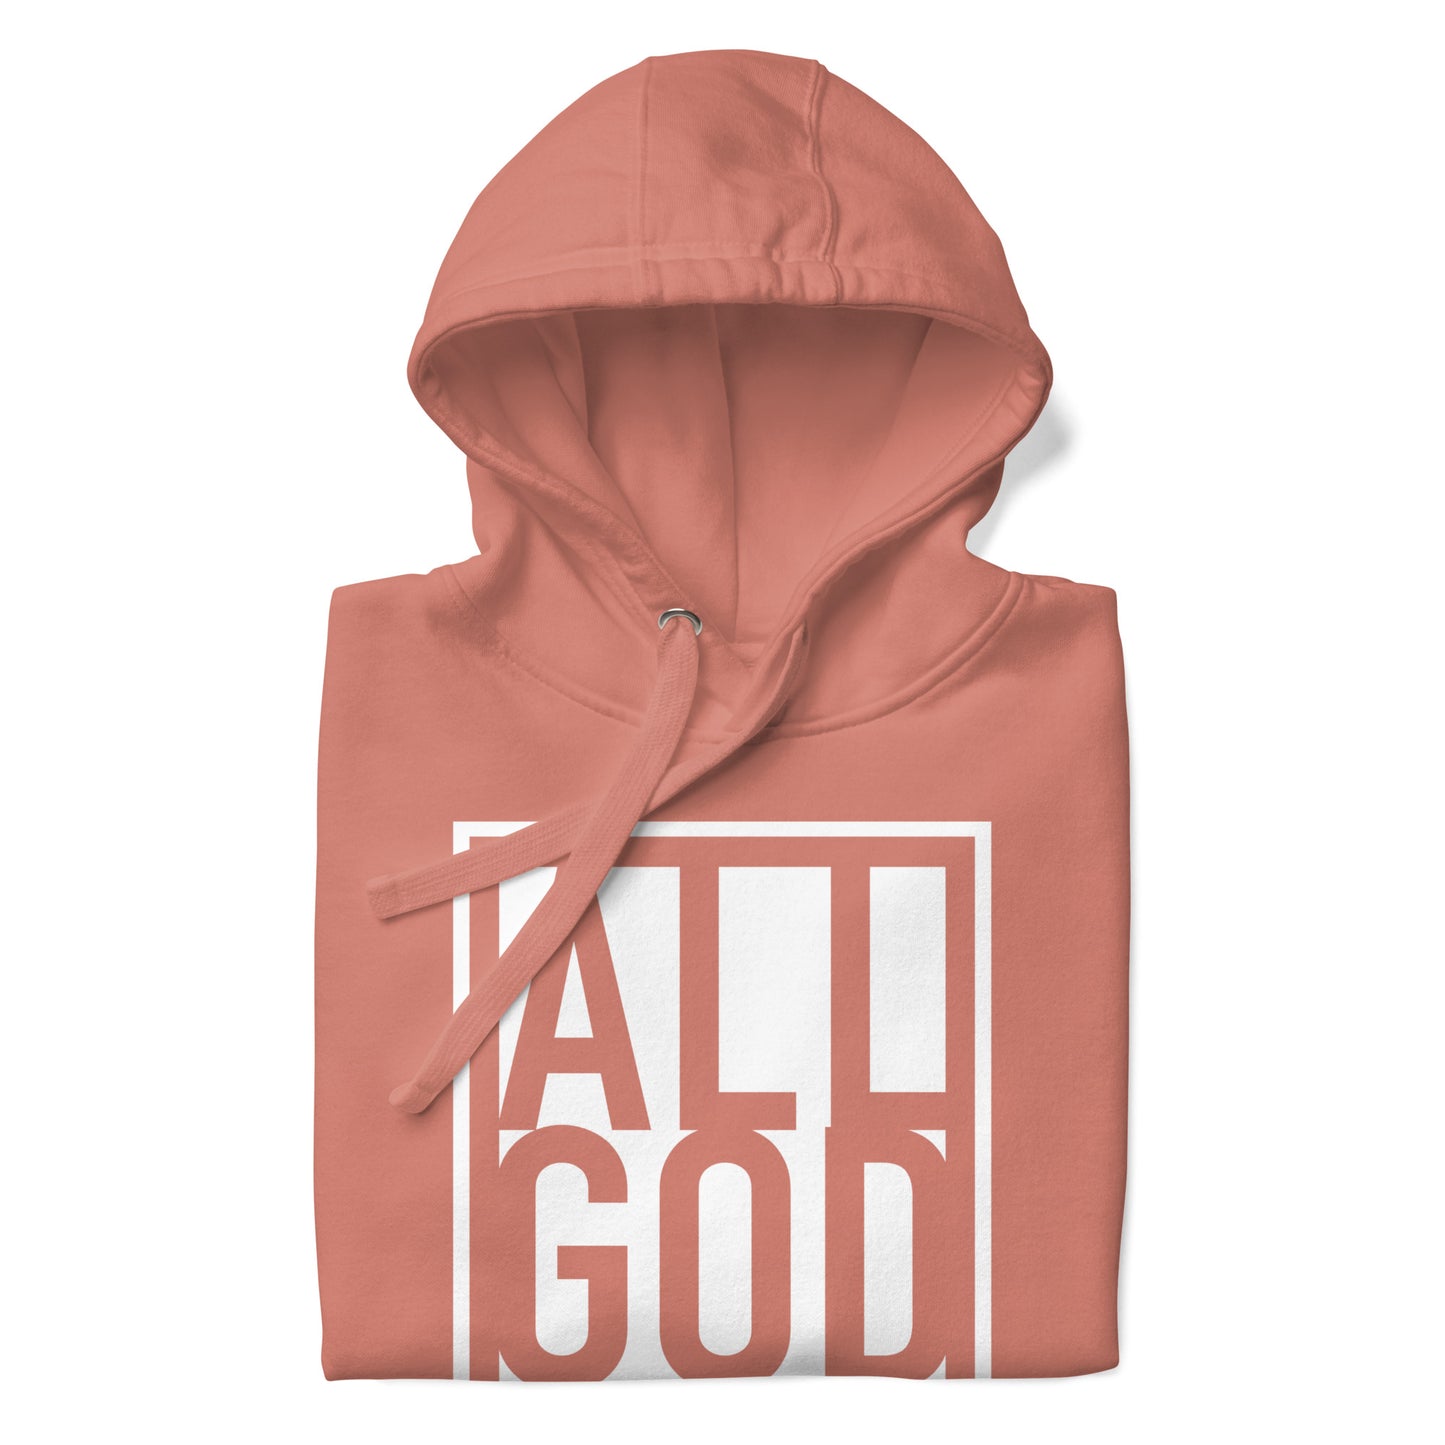 All God Dusty Rose and White Unisex Hoodie